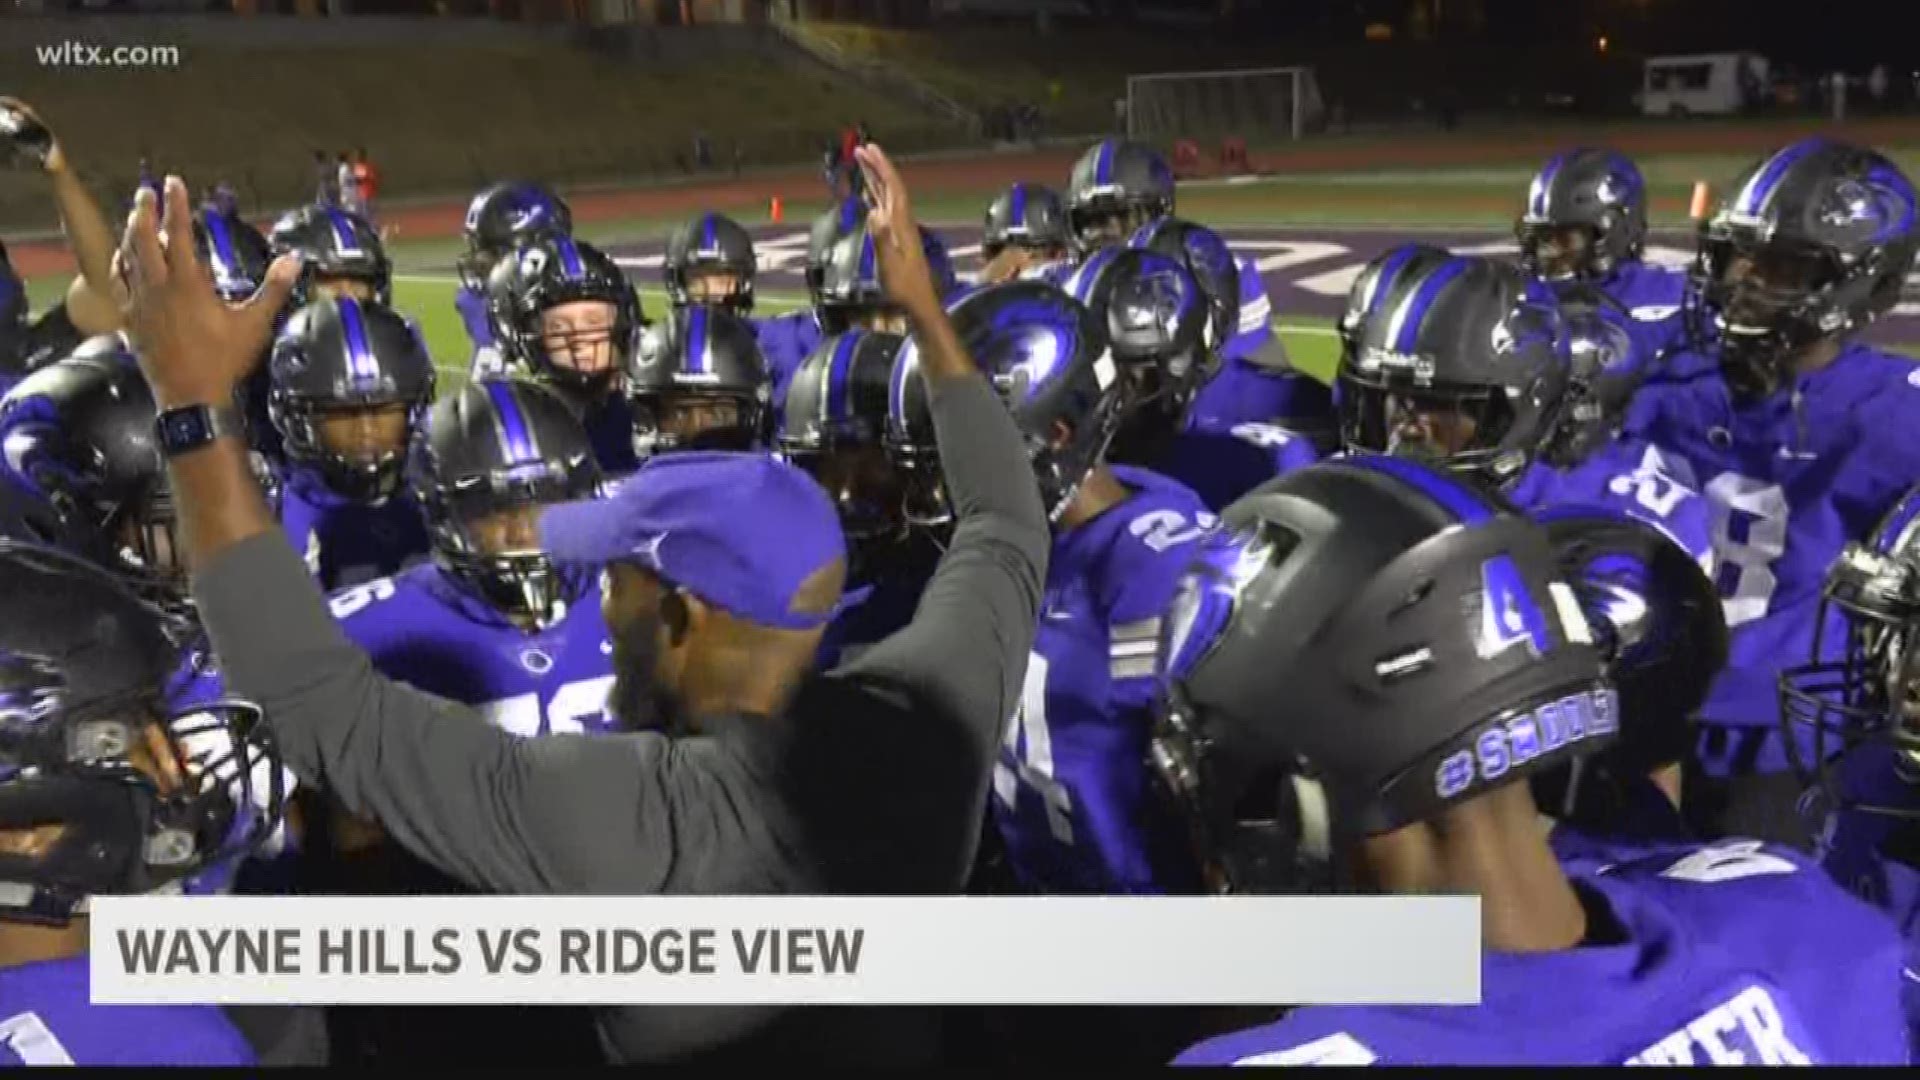 Highlights and scores from area high school football games.